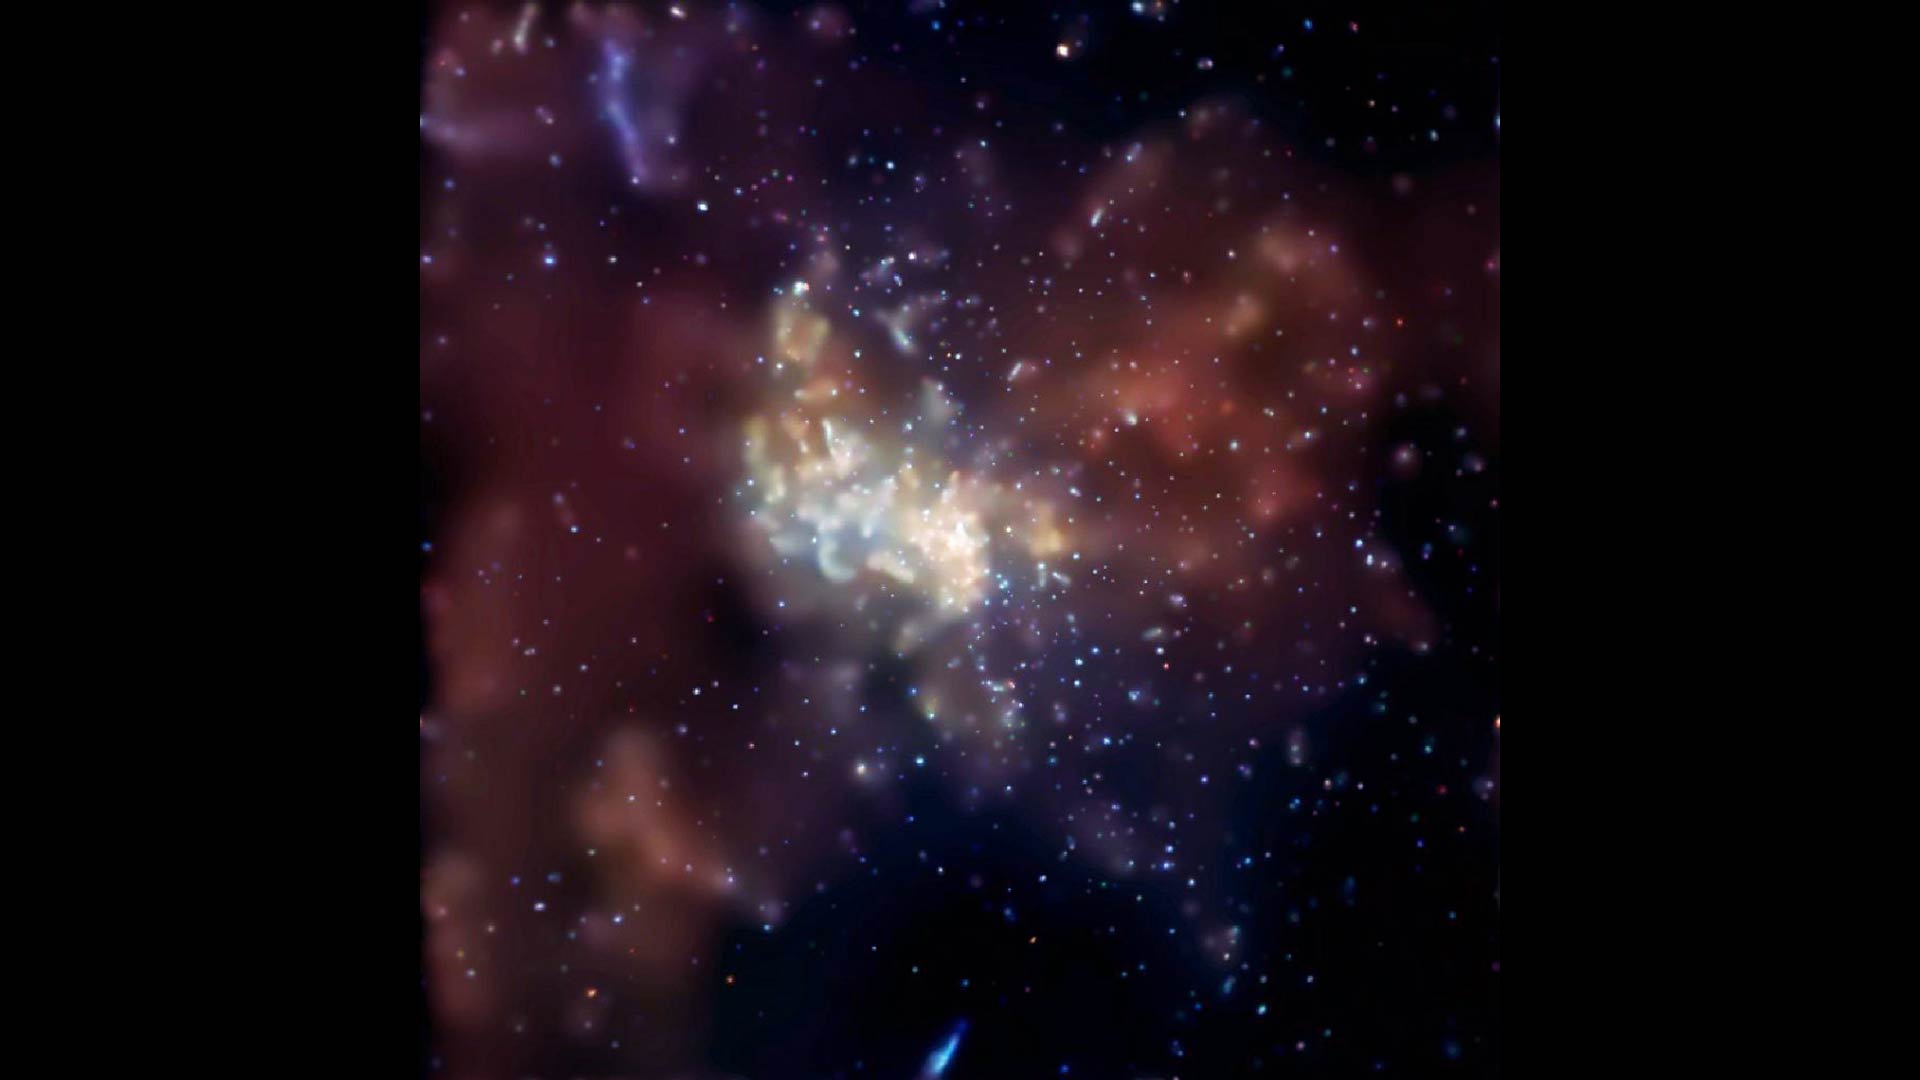 an image from the chandra x-ray observatory featuring an explosion occurring in the super massive black hole at the Milky Way's center, known as Sagittarius A or Sgr A*. Huge lobes of 20-million degree Centigrade gas ( red loops in image) flank both sides of the black hole and extend over dozens of light years.